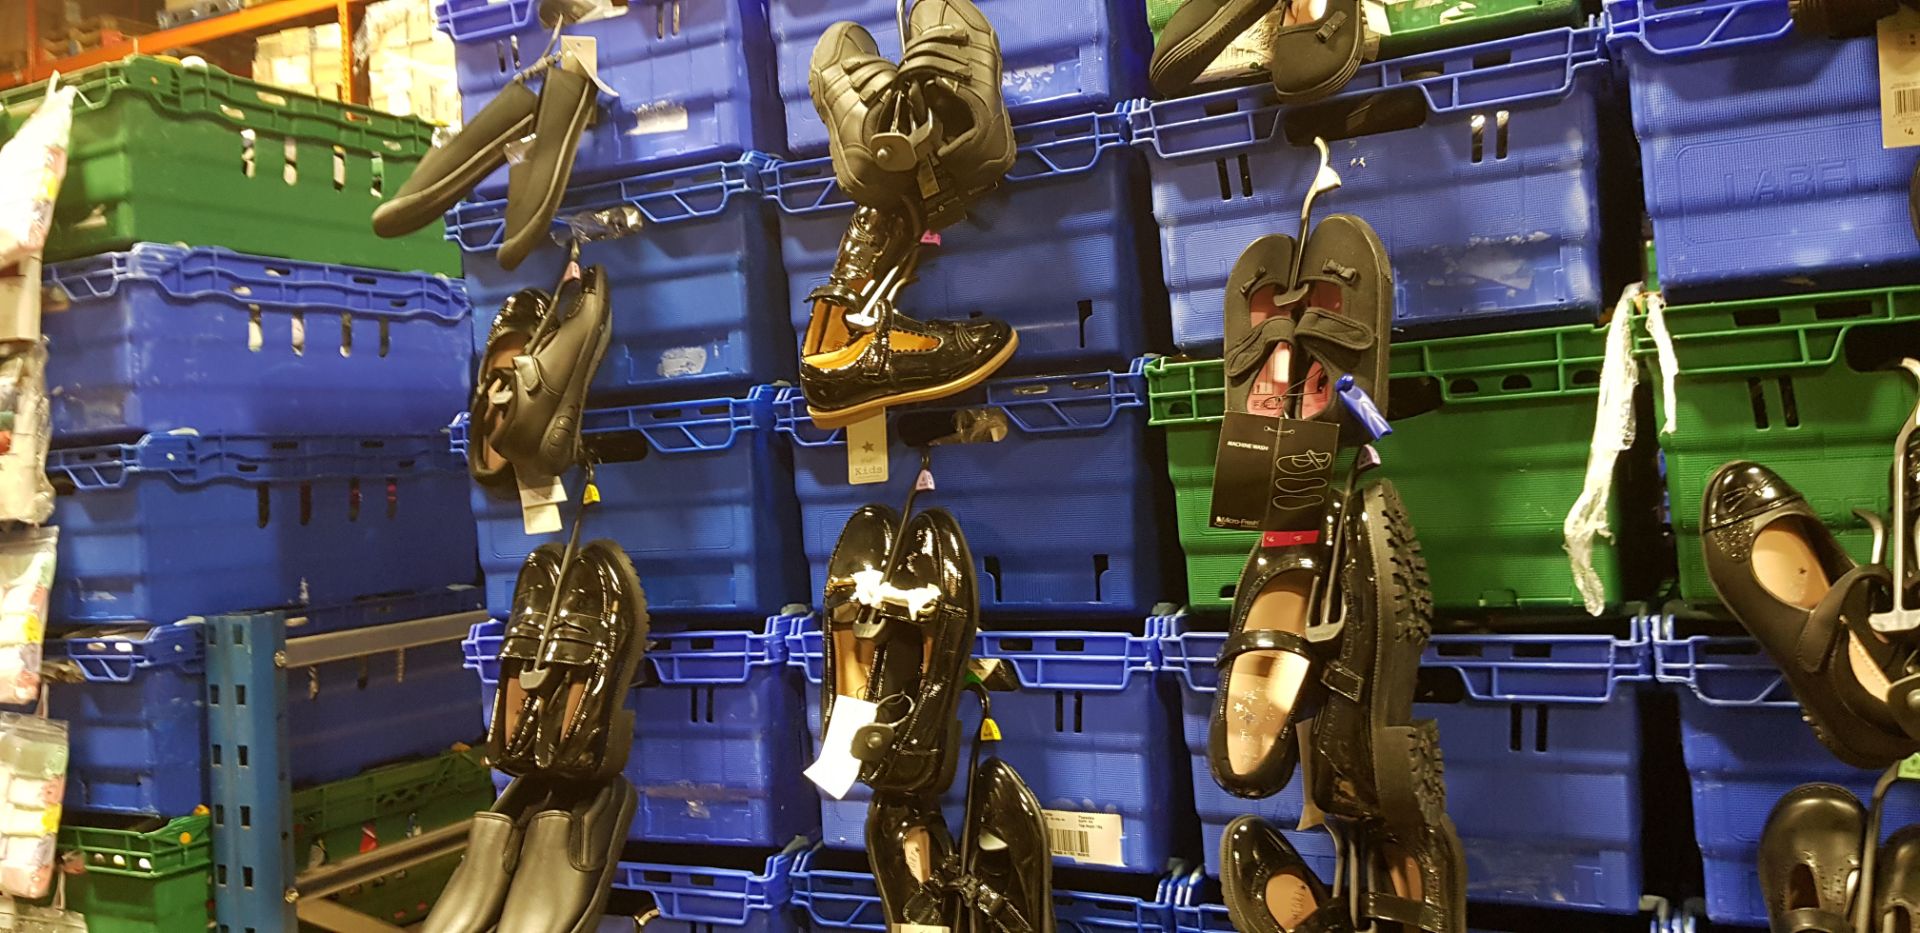 £600-£700 RETAIL PRICED BRAND NEW CHILDRENS SHOES & FOOTWEAR (MAINLY BLACK) - AVERAGE 12 PRS/TRAY.